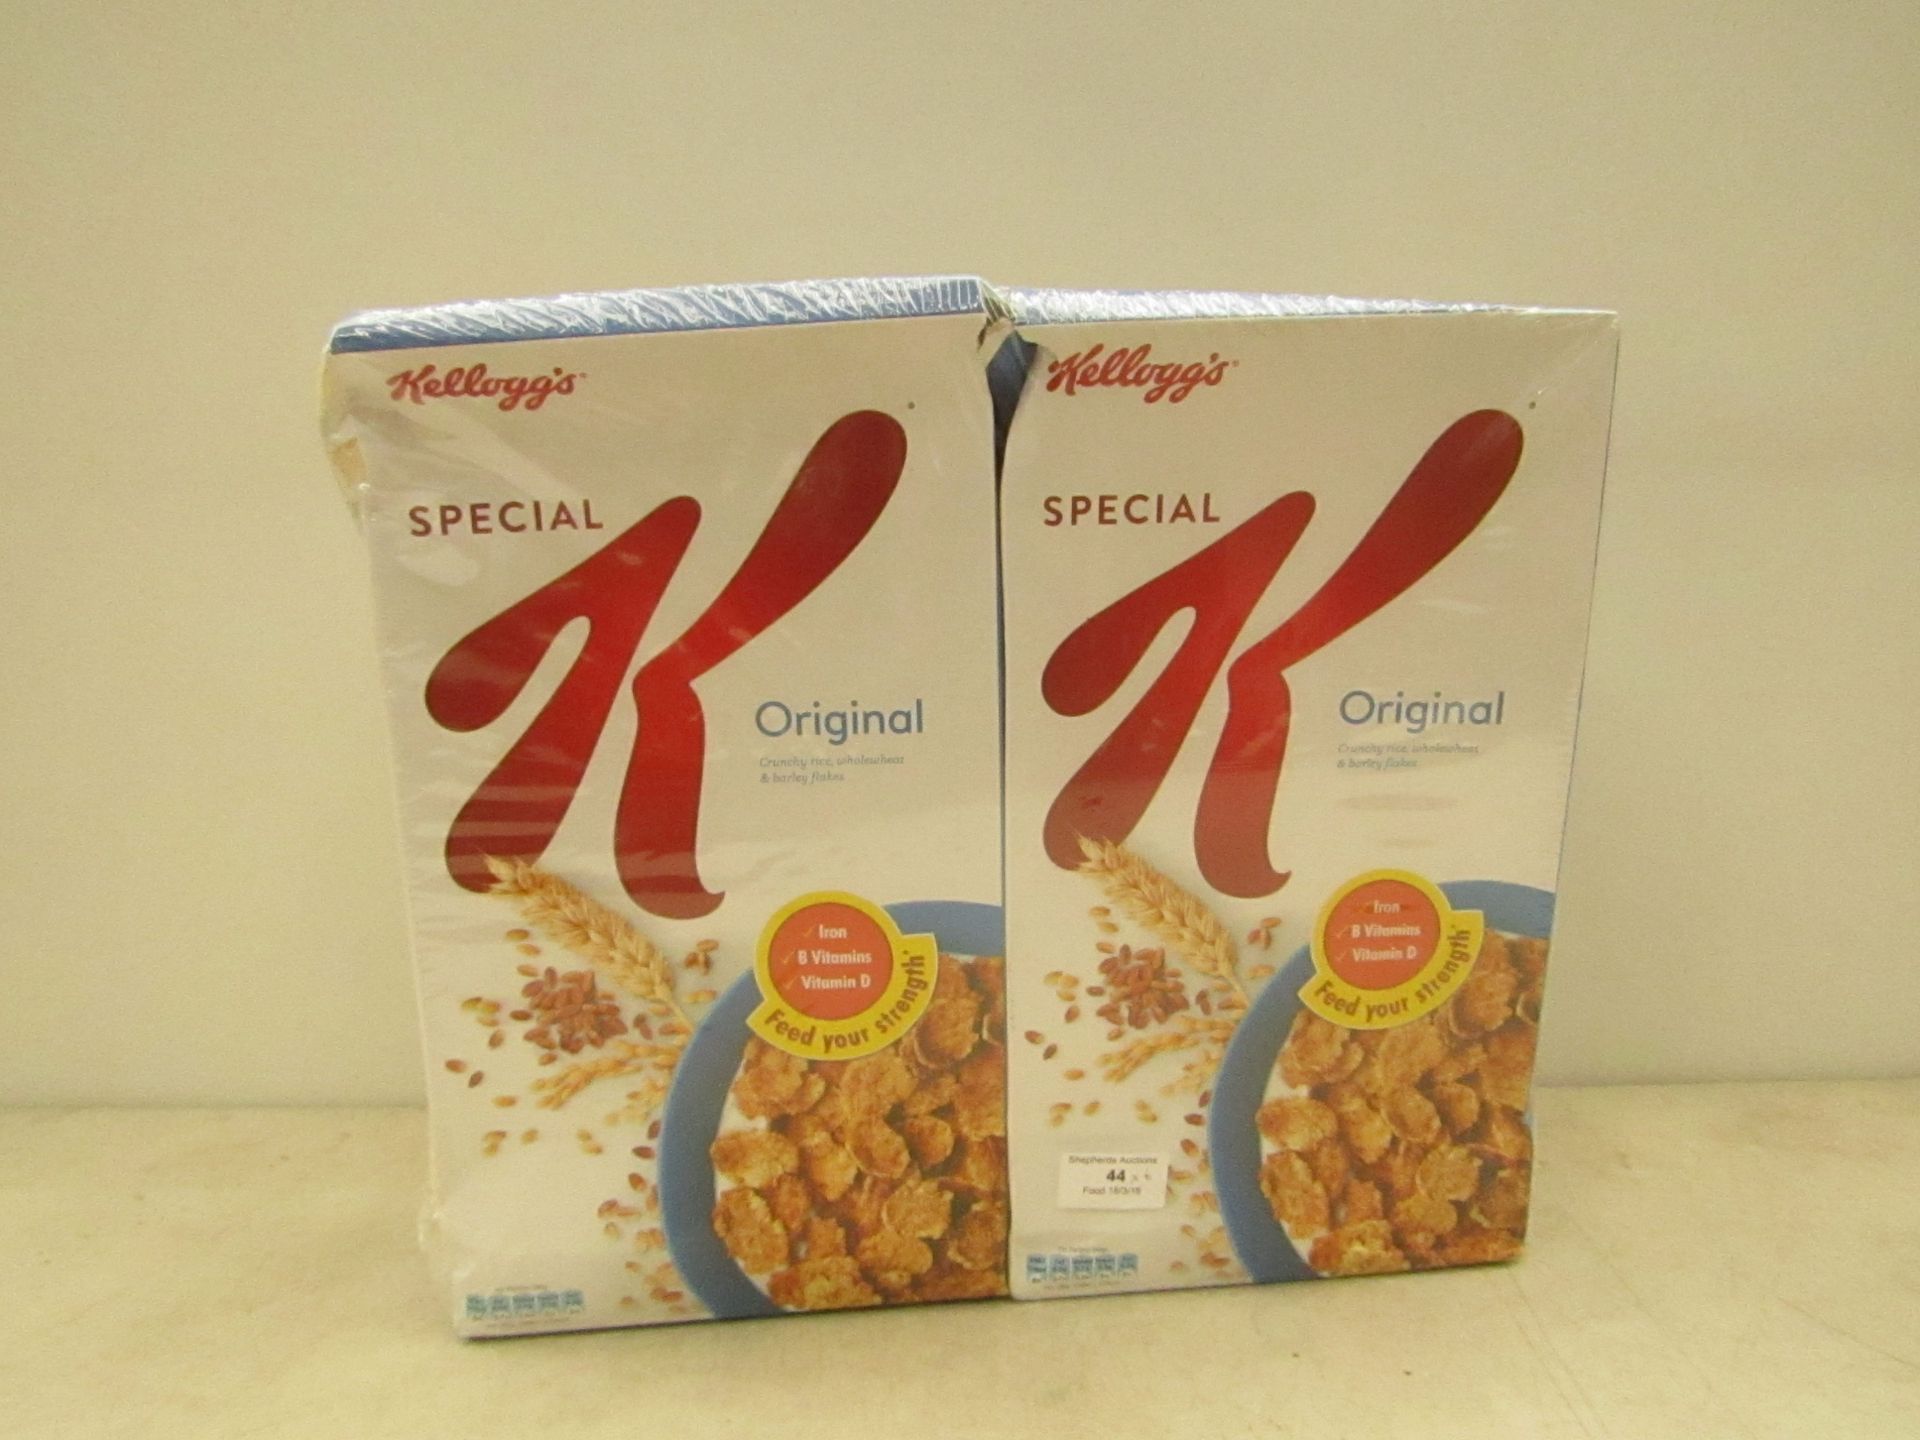 6x Boxes of Kelloggs special K 750g each (4.5KG total) some boxes may be slightly damaged. BB 09/